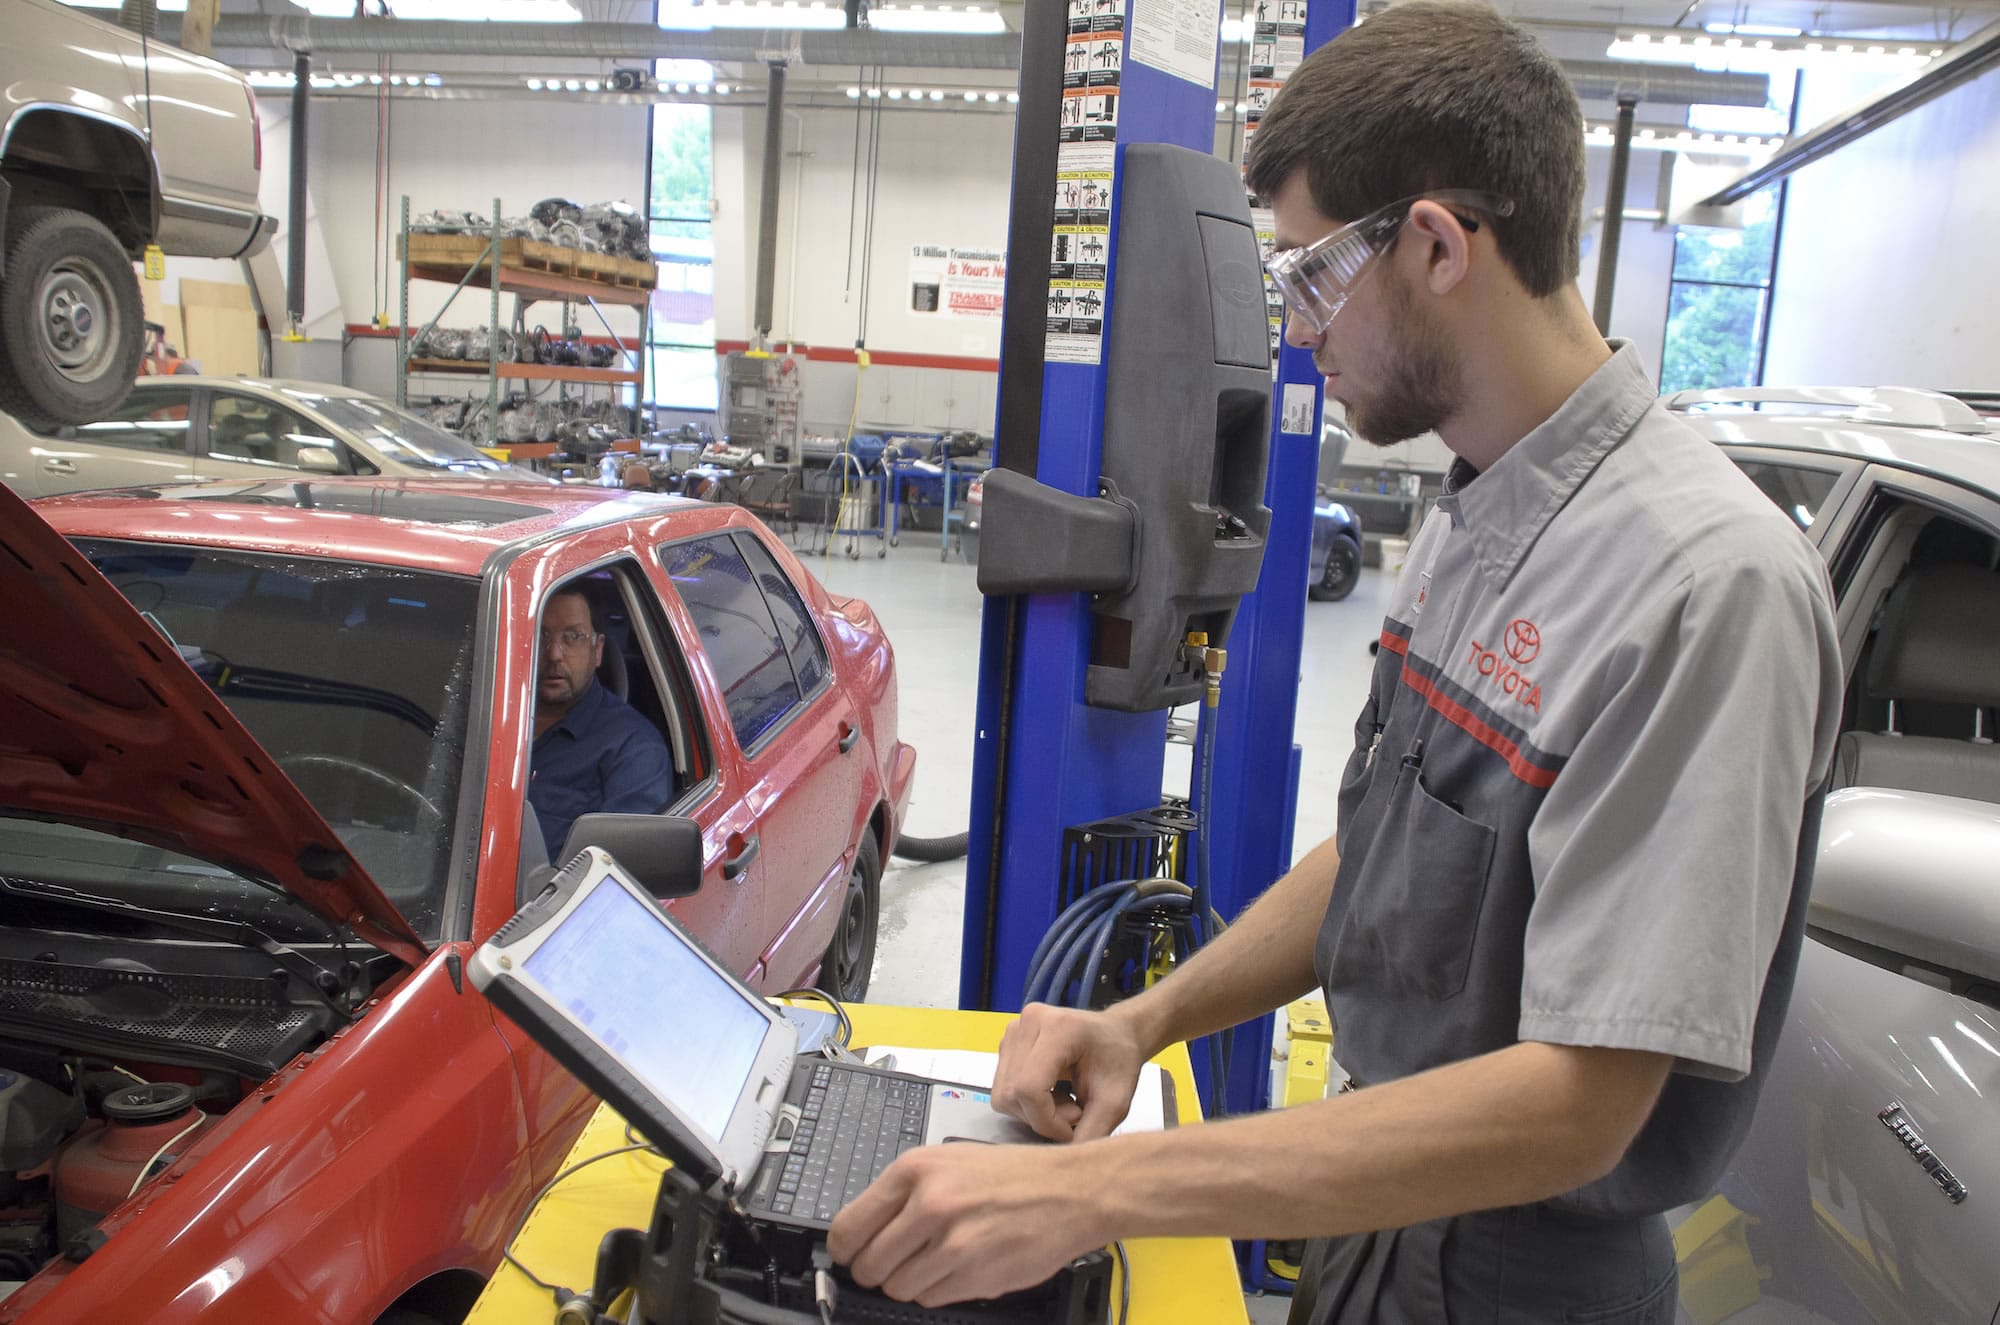 Toyota Motor Corp. will upgrade its partnership with Clark College by making changes next fall in a training program for automotive students.